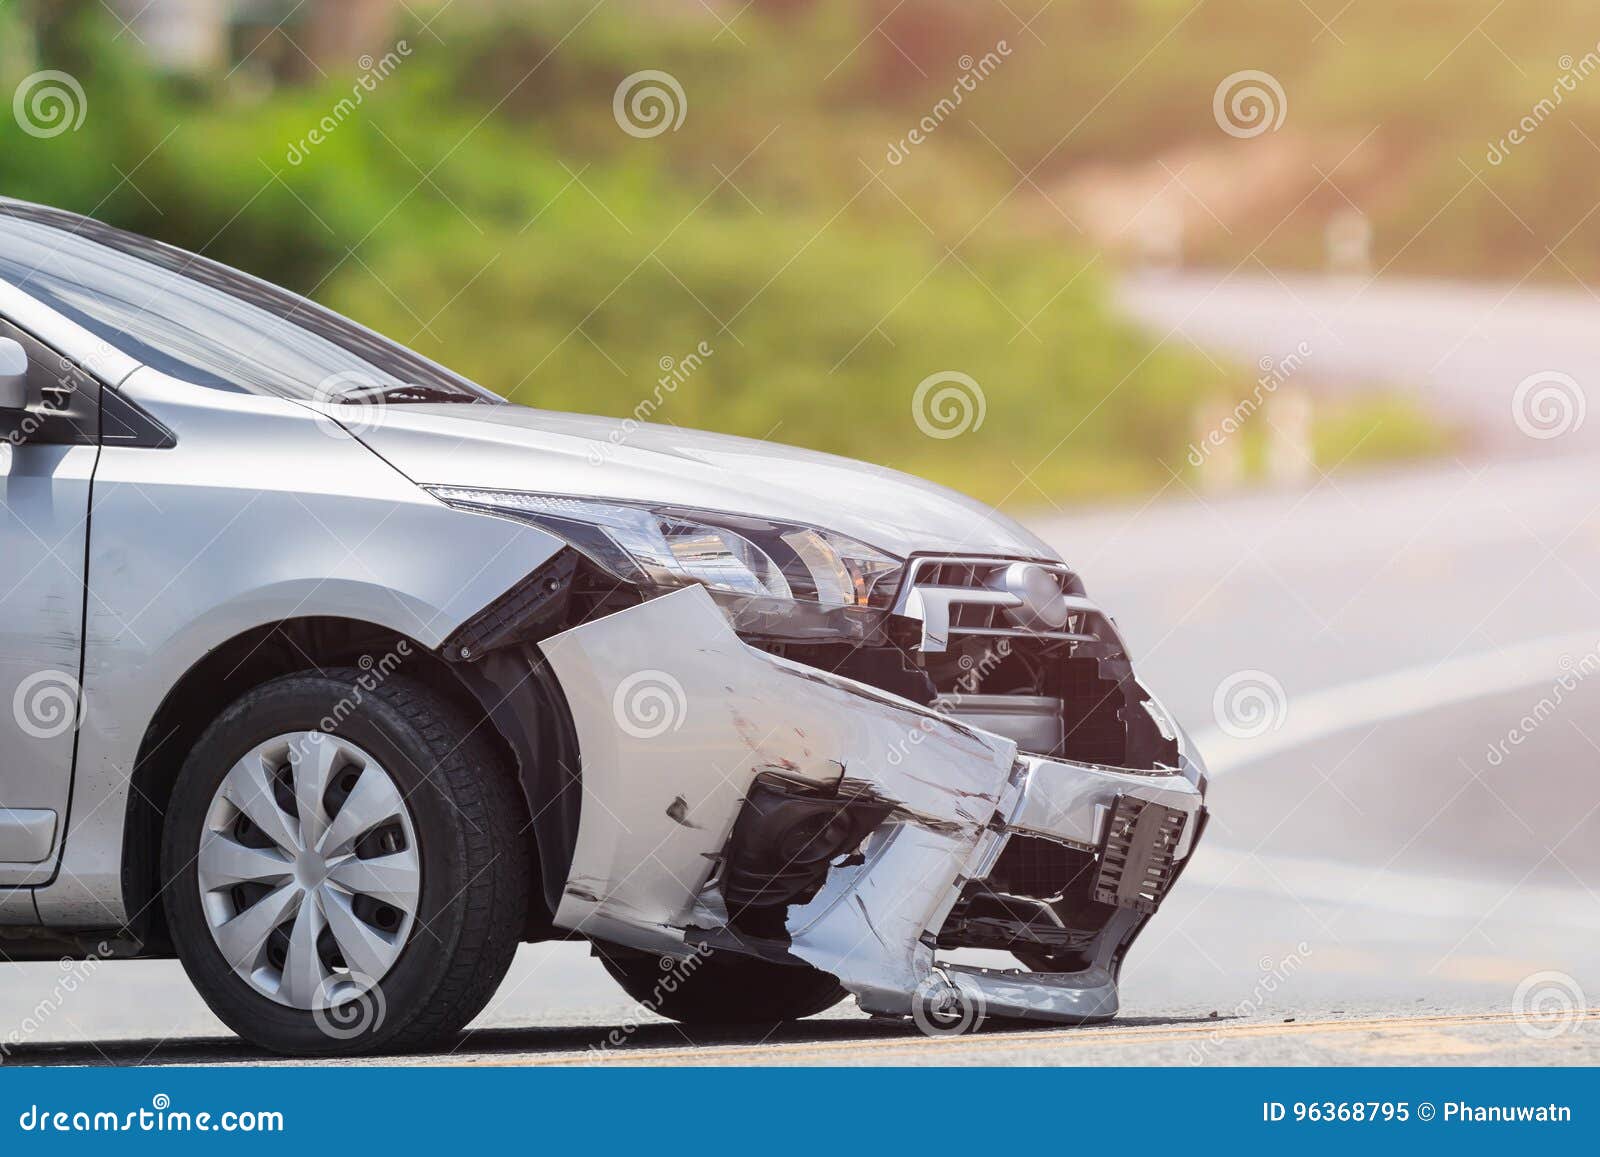 Silver Car Get Damaged by Crash Accident on the Road. Car Repair Stock